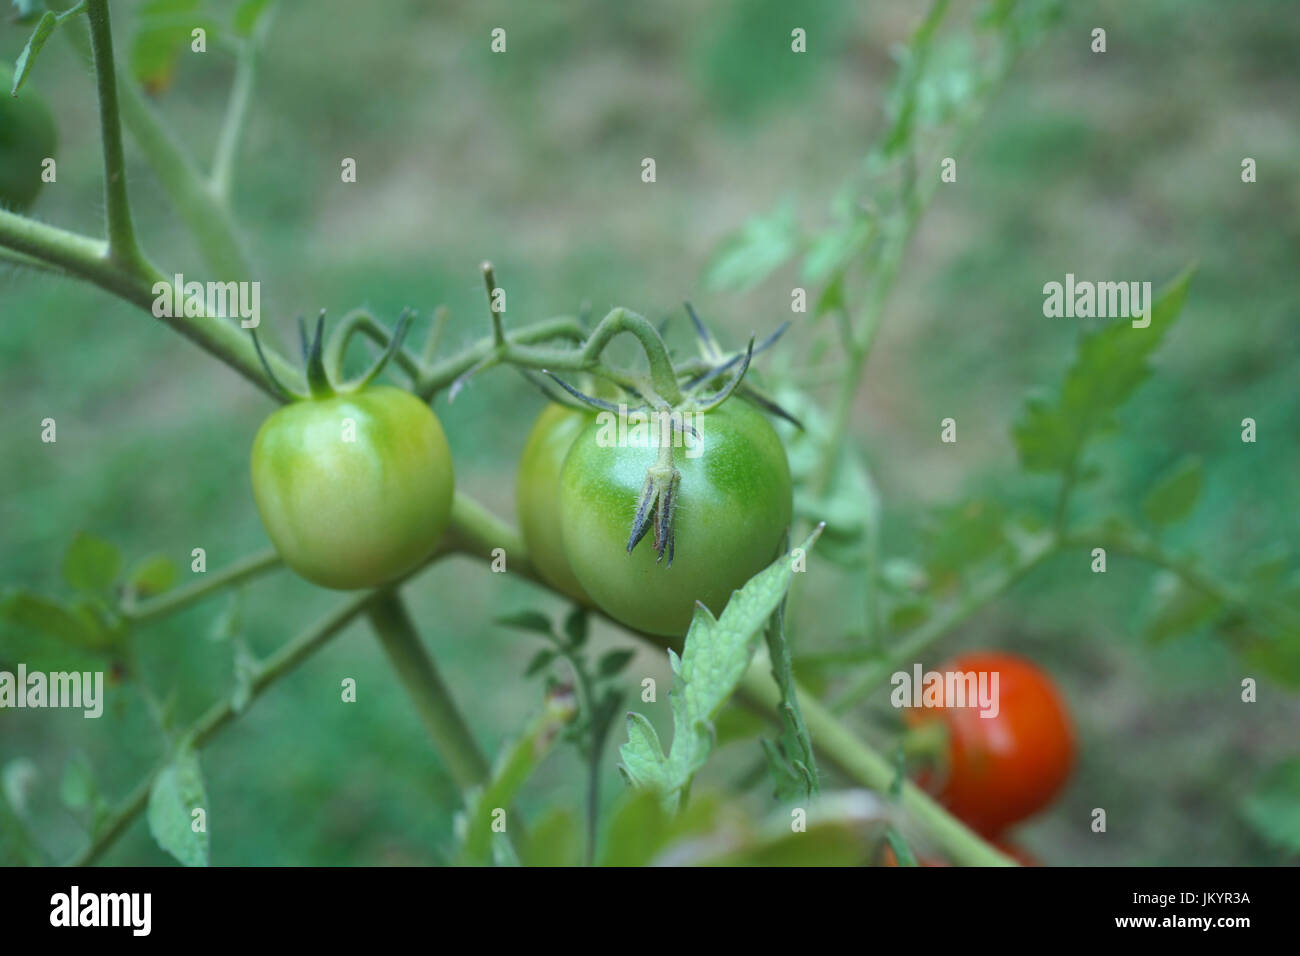 tomato fruit green and red,  green and red tomatoes, tomatoes on the vine Stock Photo